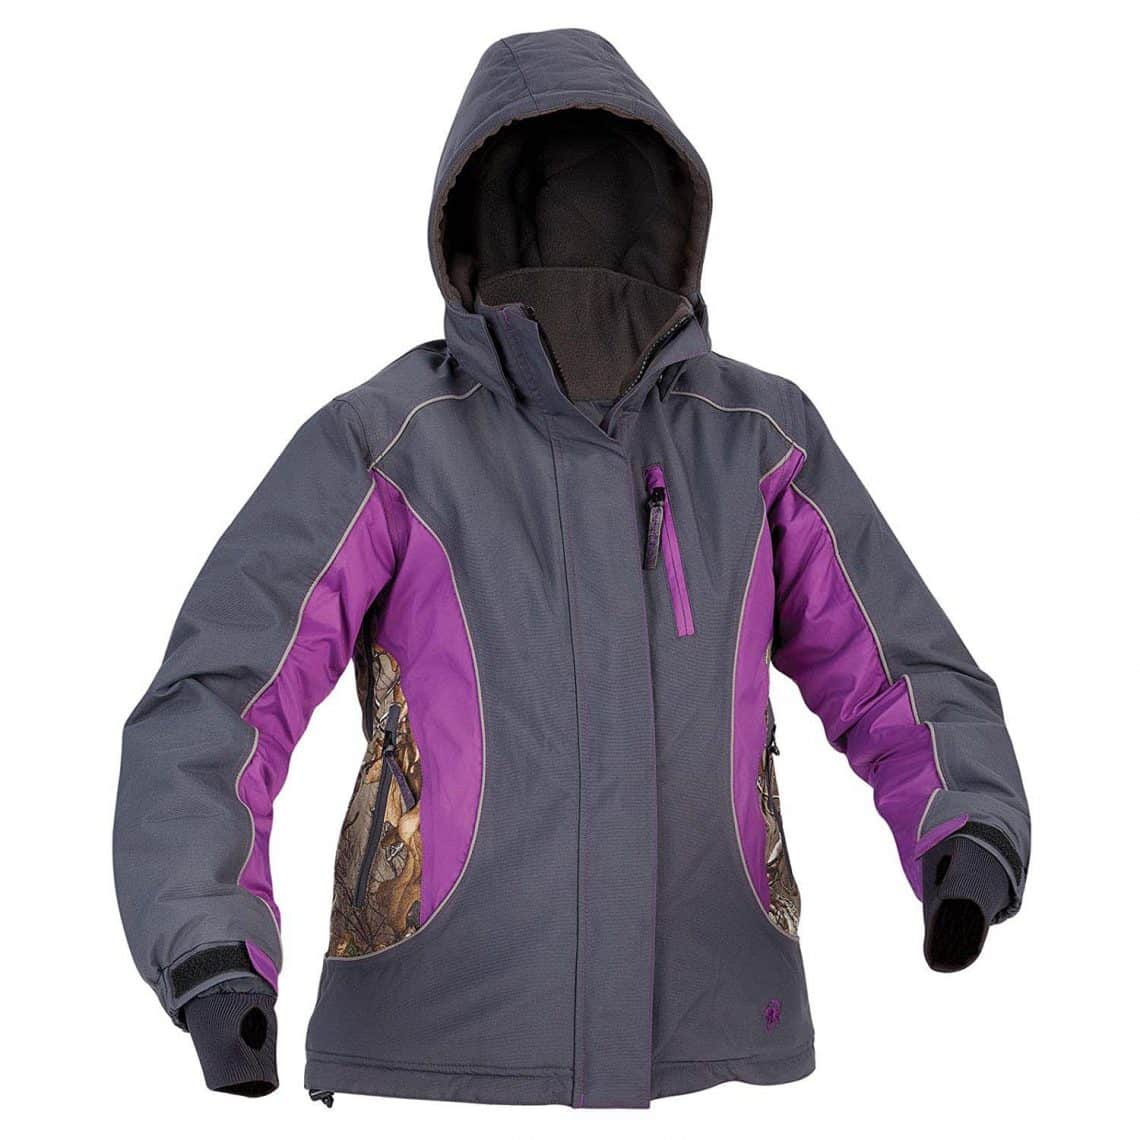 ARCTIC SHIELD WOMEN'S COLD WEATHER JACKET - Northwoods Wholesale Outlet